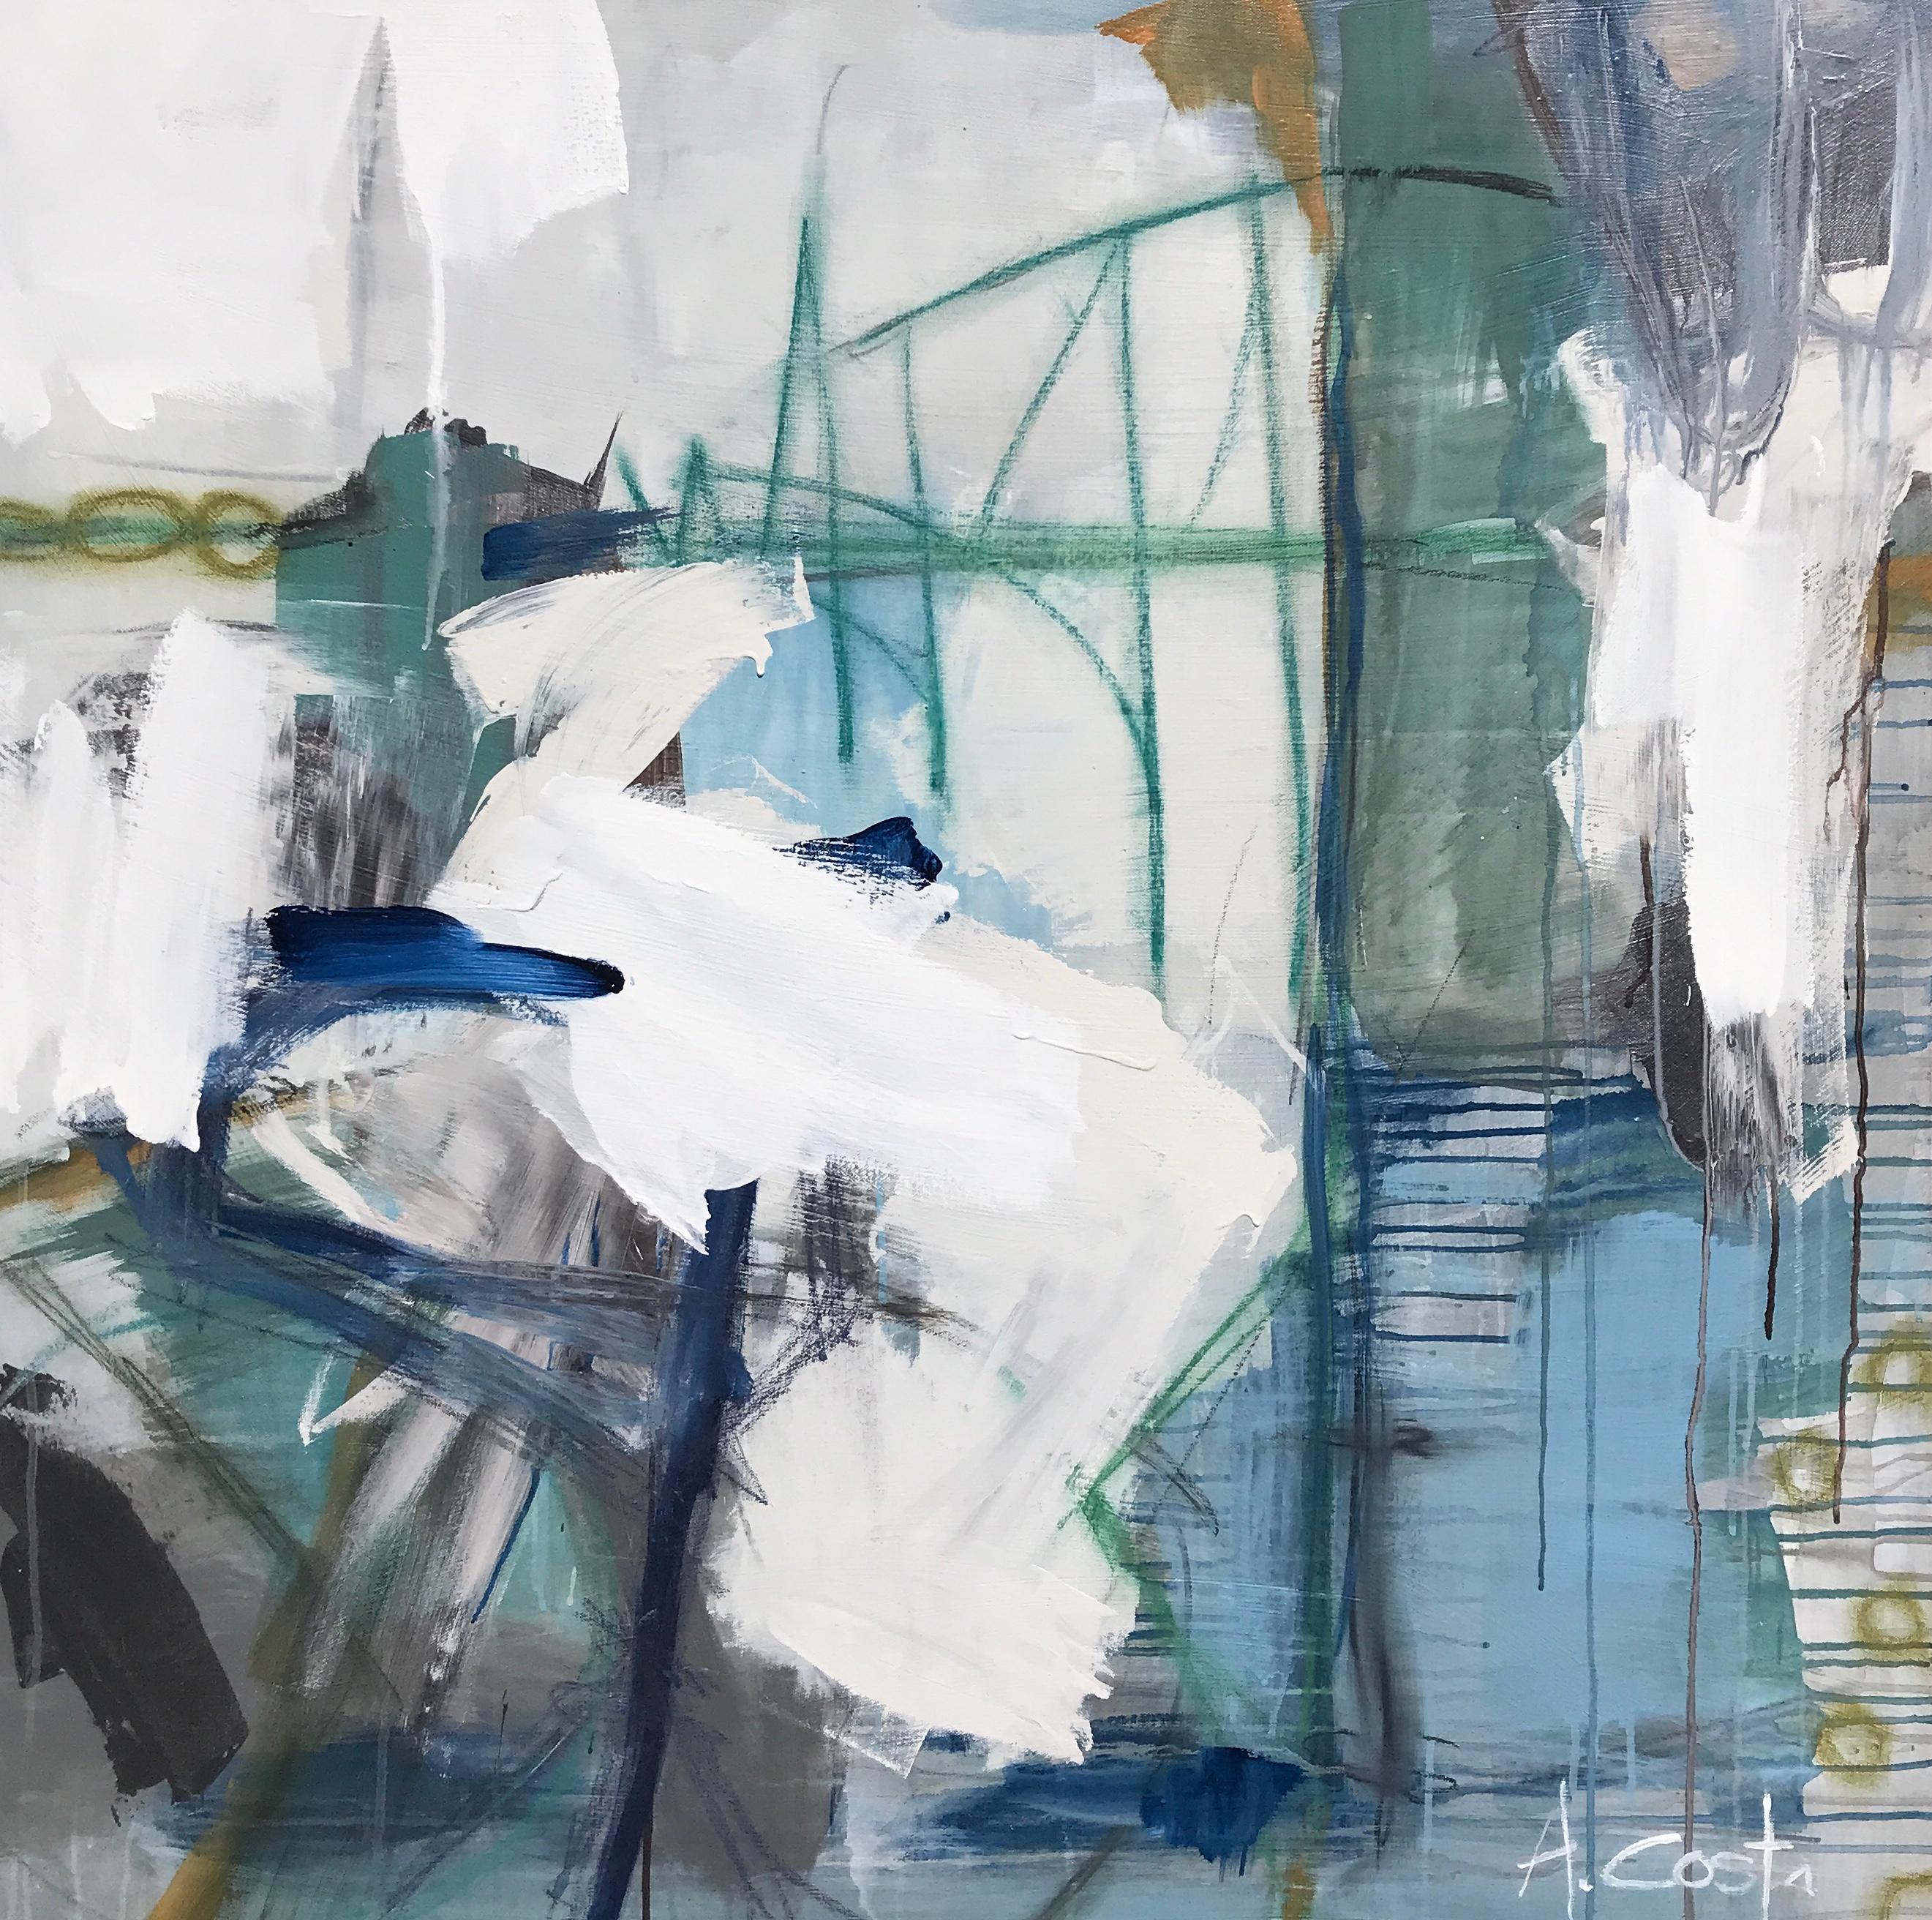 'Amazing Day' is a large abstract oil on gesso painting of square format created by American artist Andrea Costa in 2019. Featuring a palette made of blue, white, grey and green tones, the painting presents a joyous arrangement of colors and bold